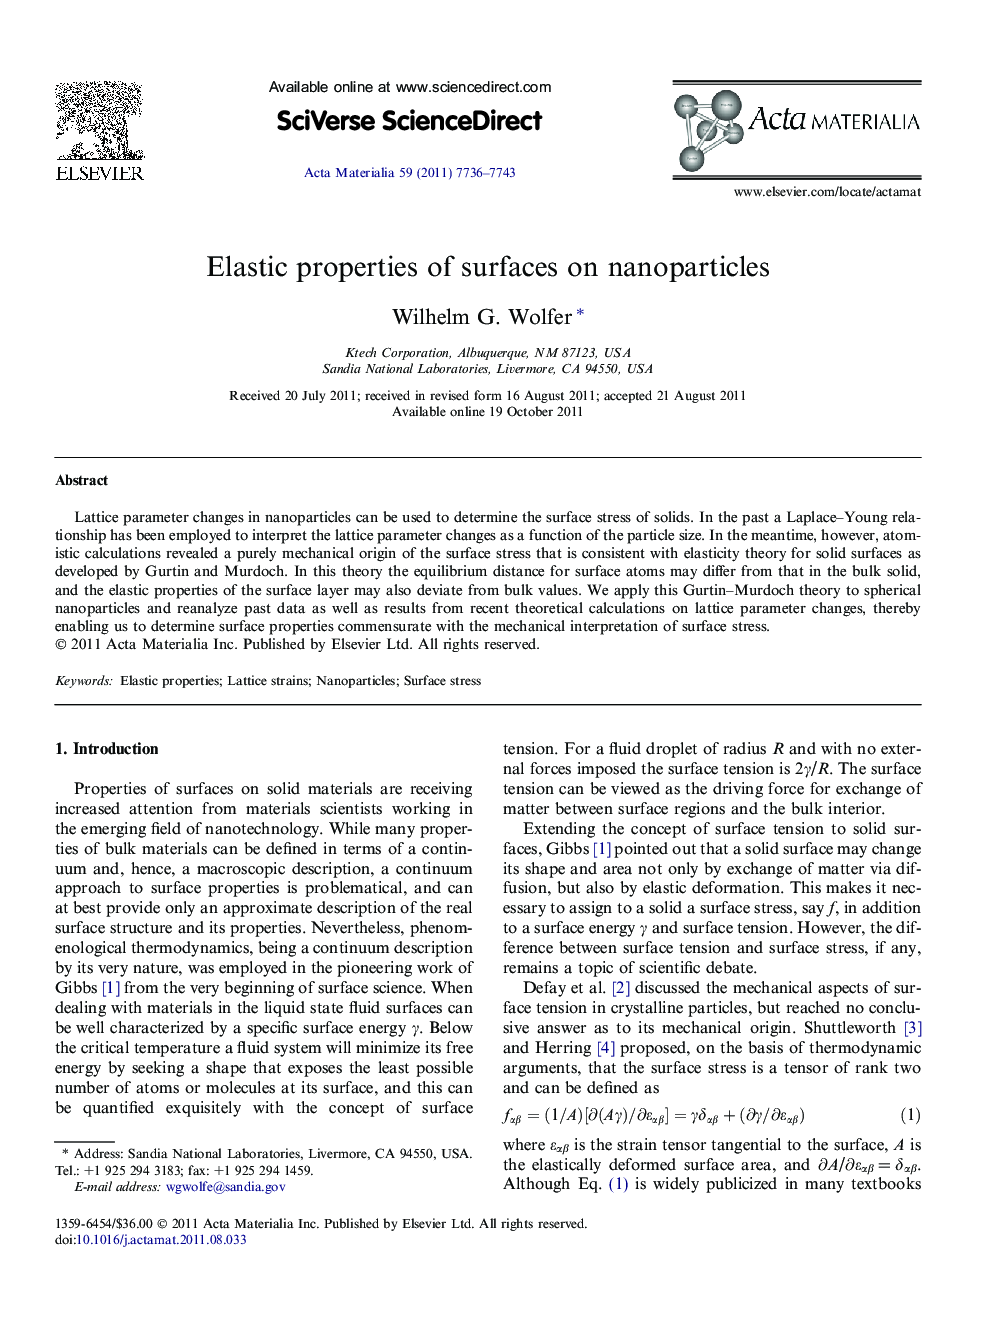 Elastic properties of surfaces on nanoparticles